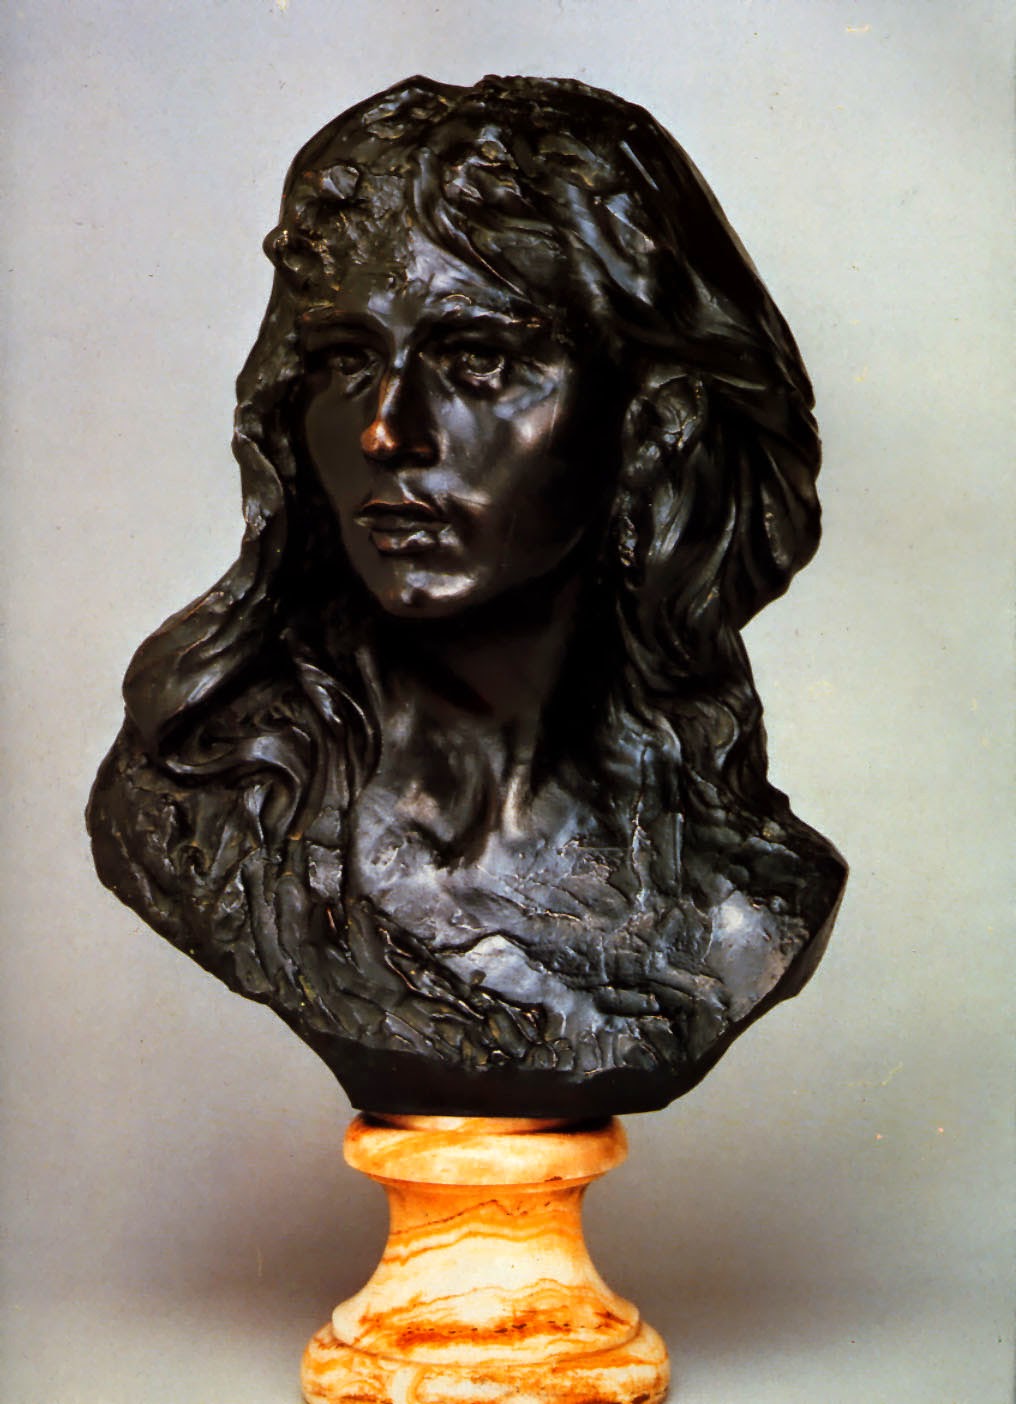 http://uploads8.wikiart.org/images/auguste-rodin/camille-claudel.jpg